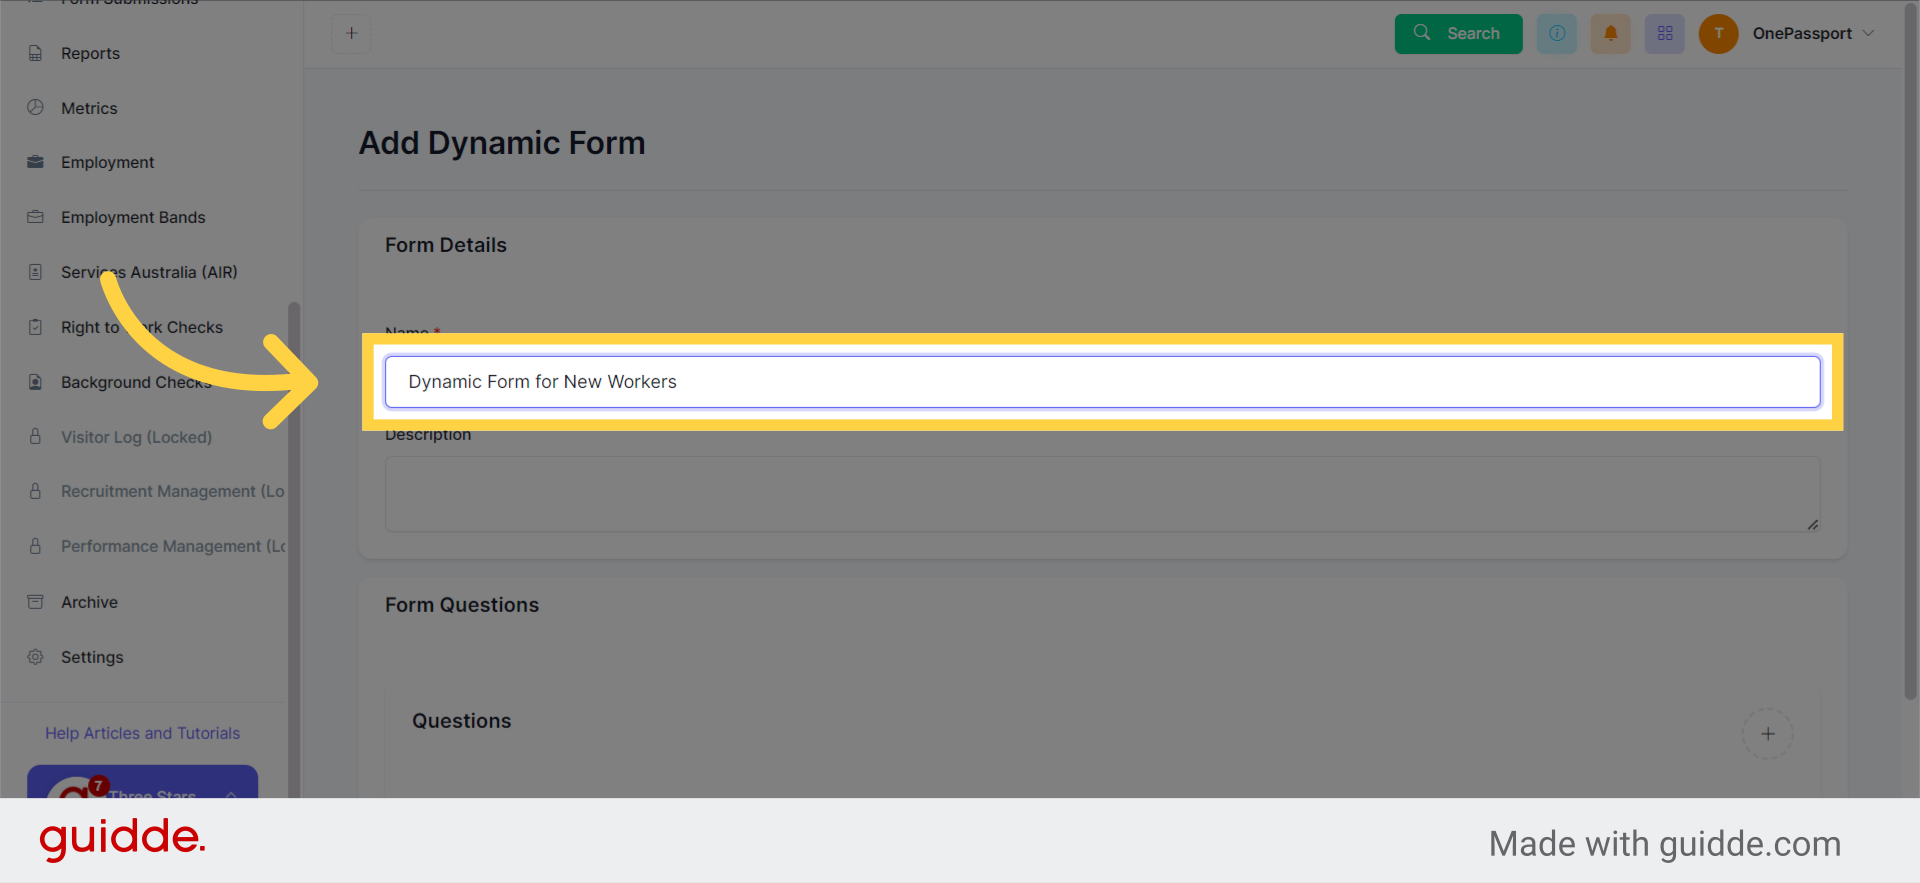 Provide a Name for the Dynamic Form. For instance, fill in 'Dynamic Form for New Workers'